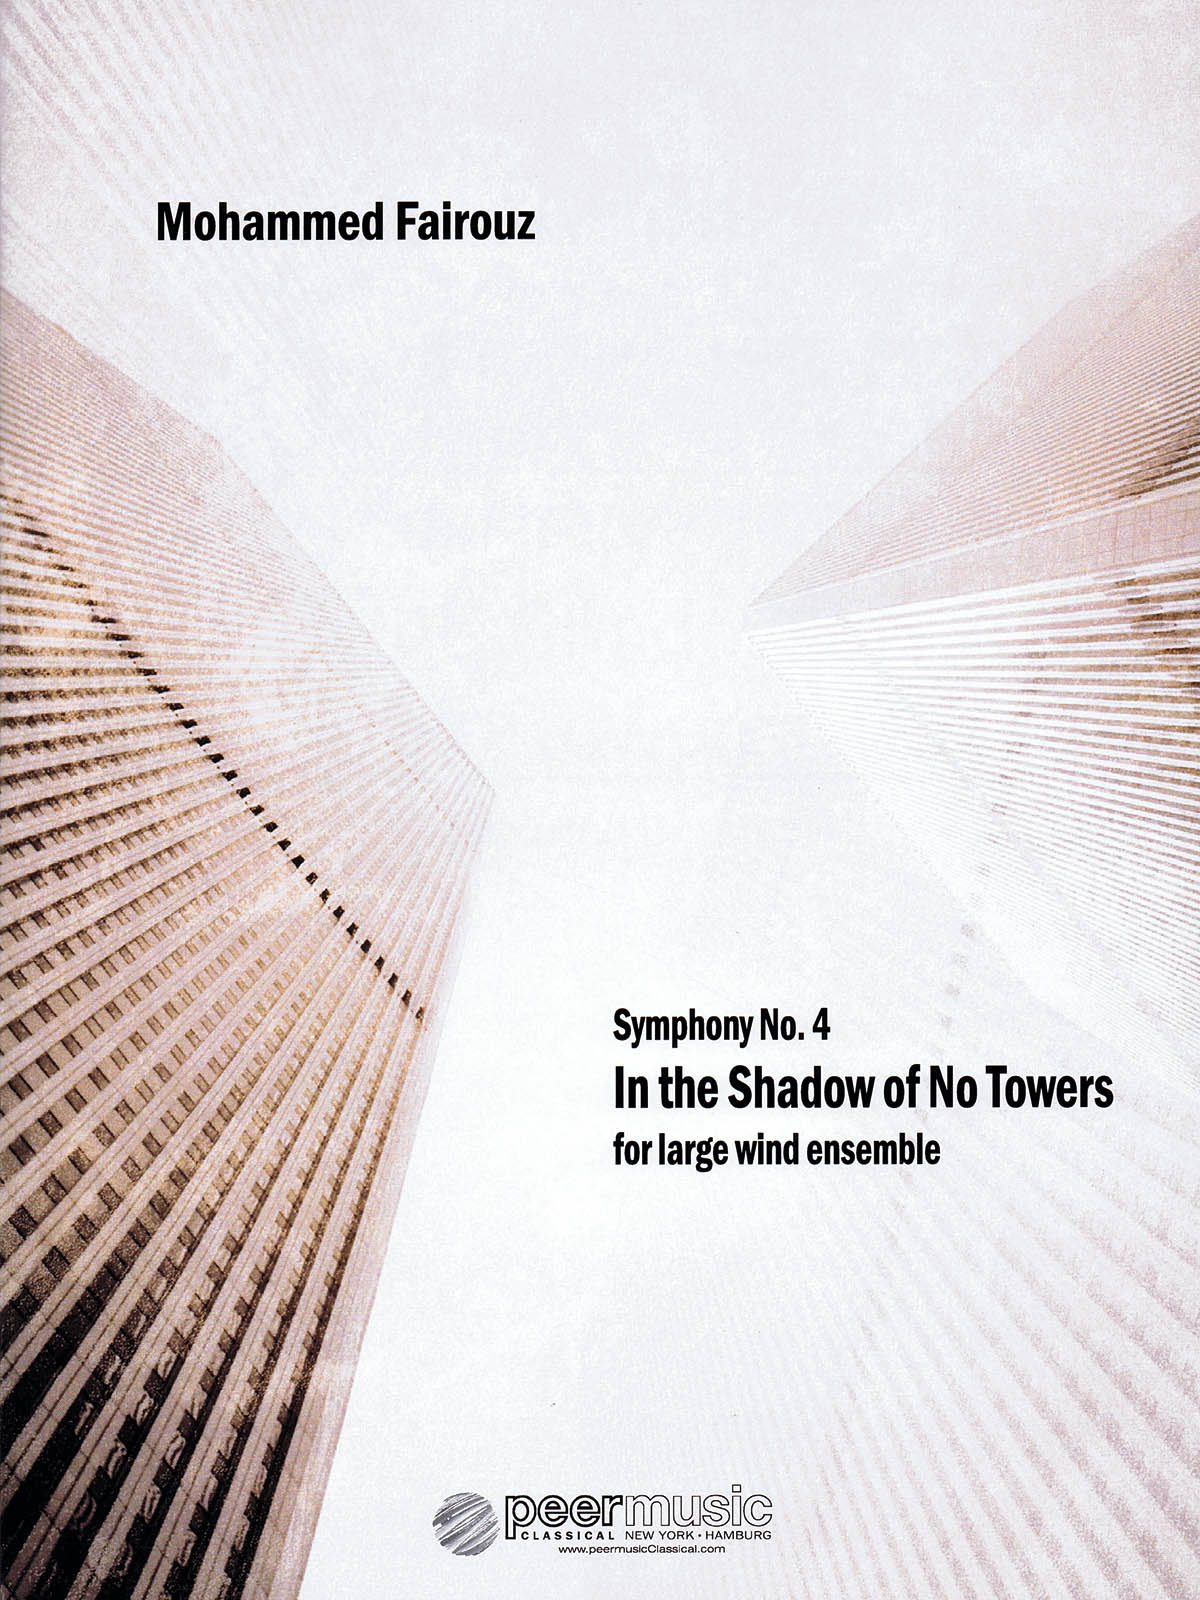 Mohammed Fairouz: Symphony No. 4 (In the Shadow of No Towers): Wind Ensemble: